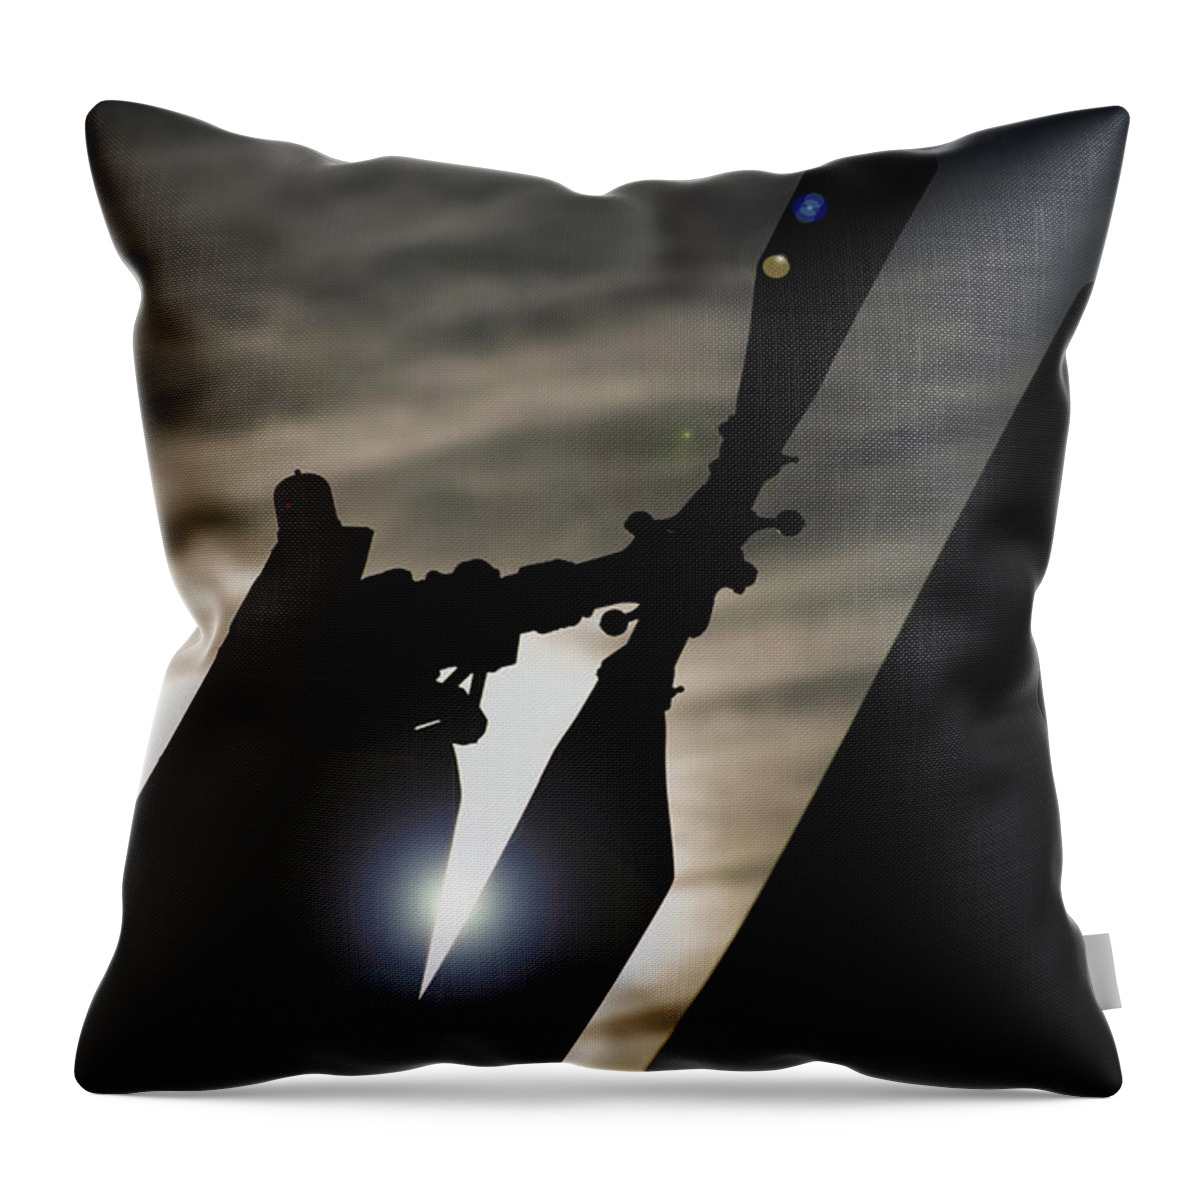 Tale Throw Pillow featuring the photograph Tale Sun by Paul Job